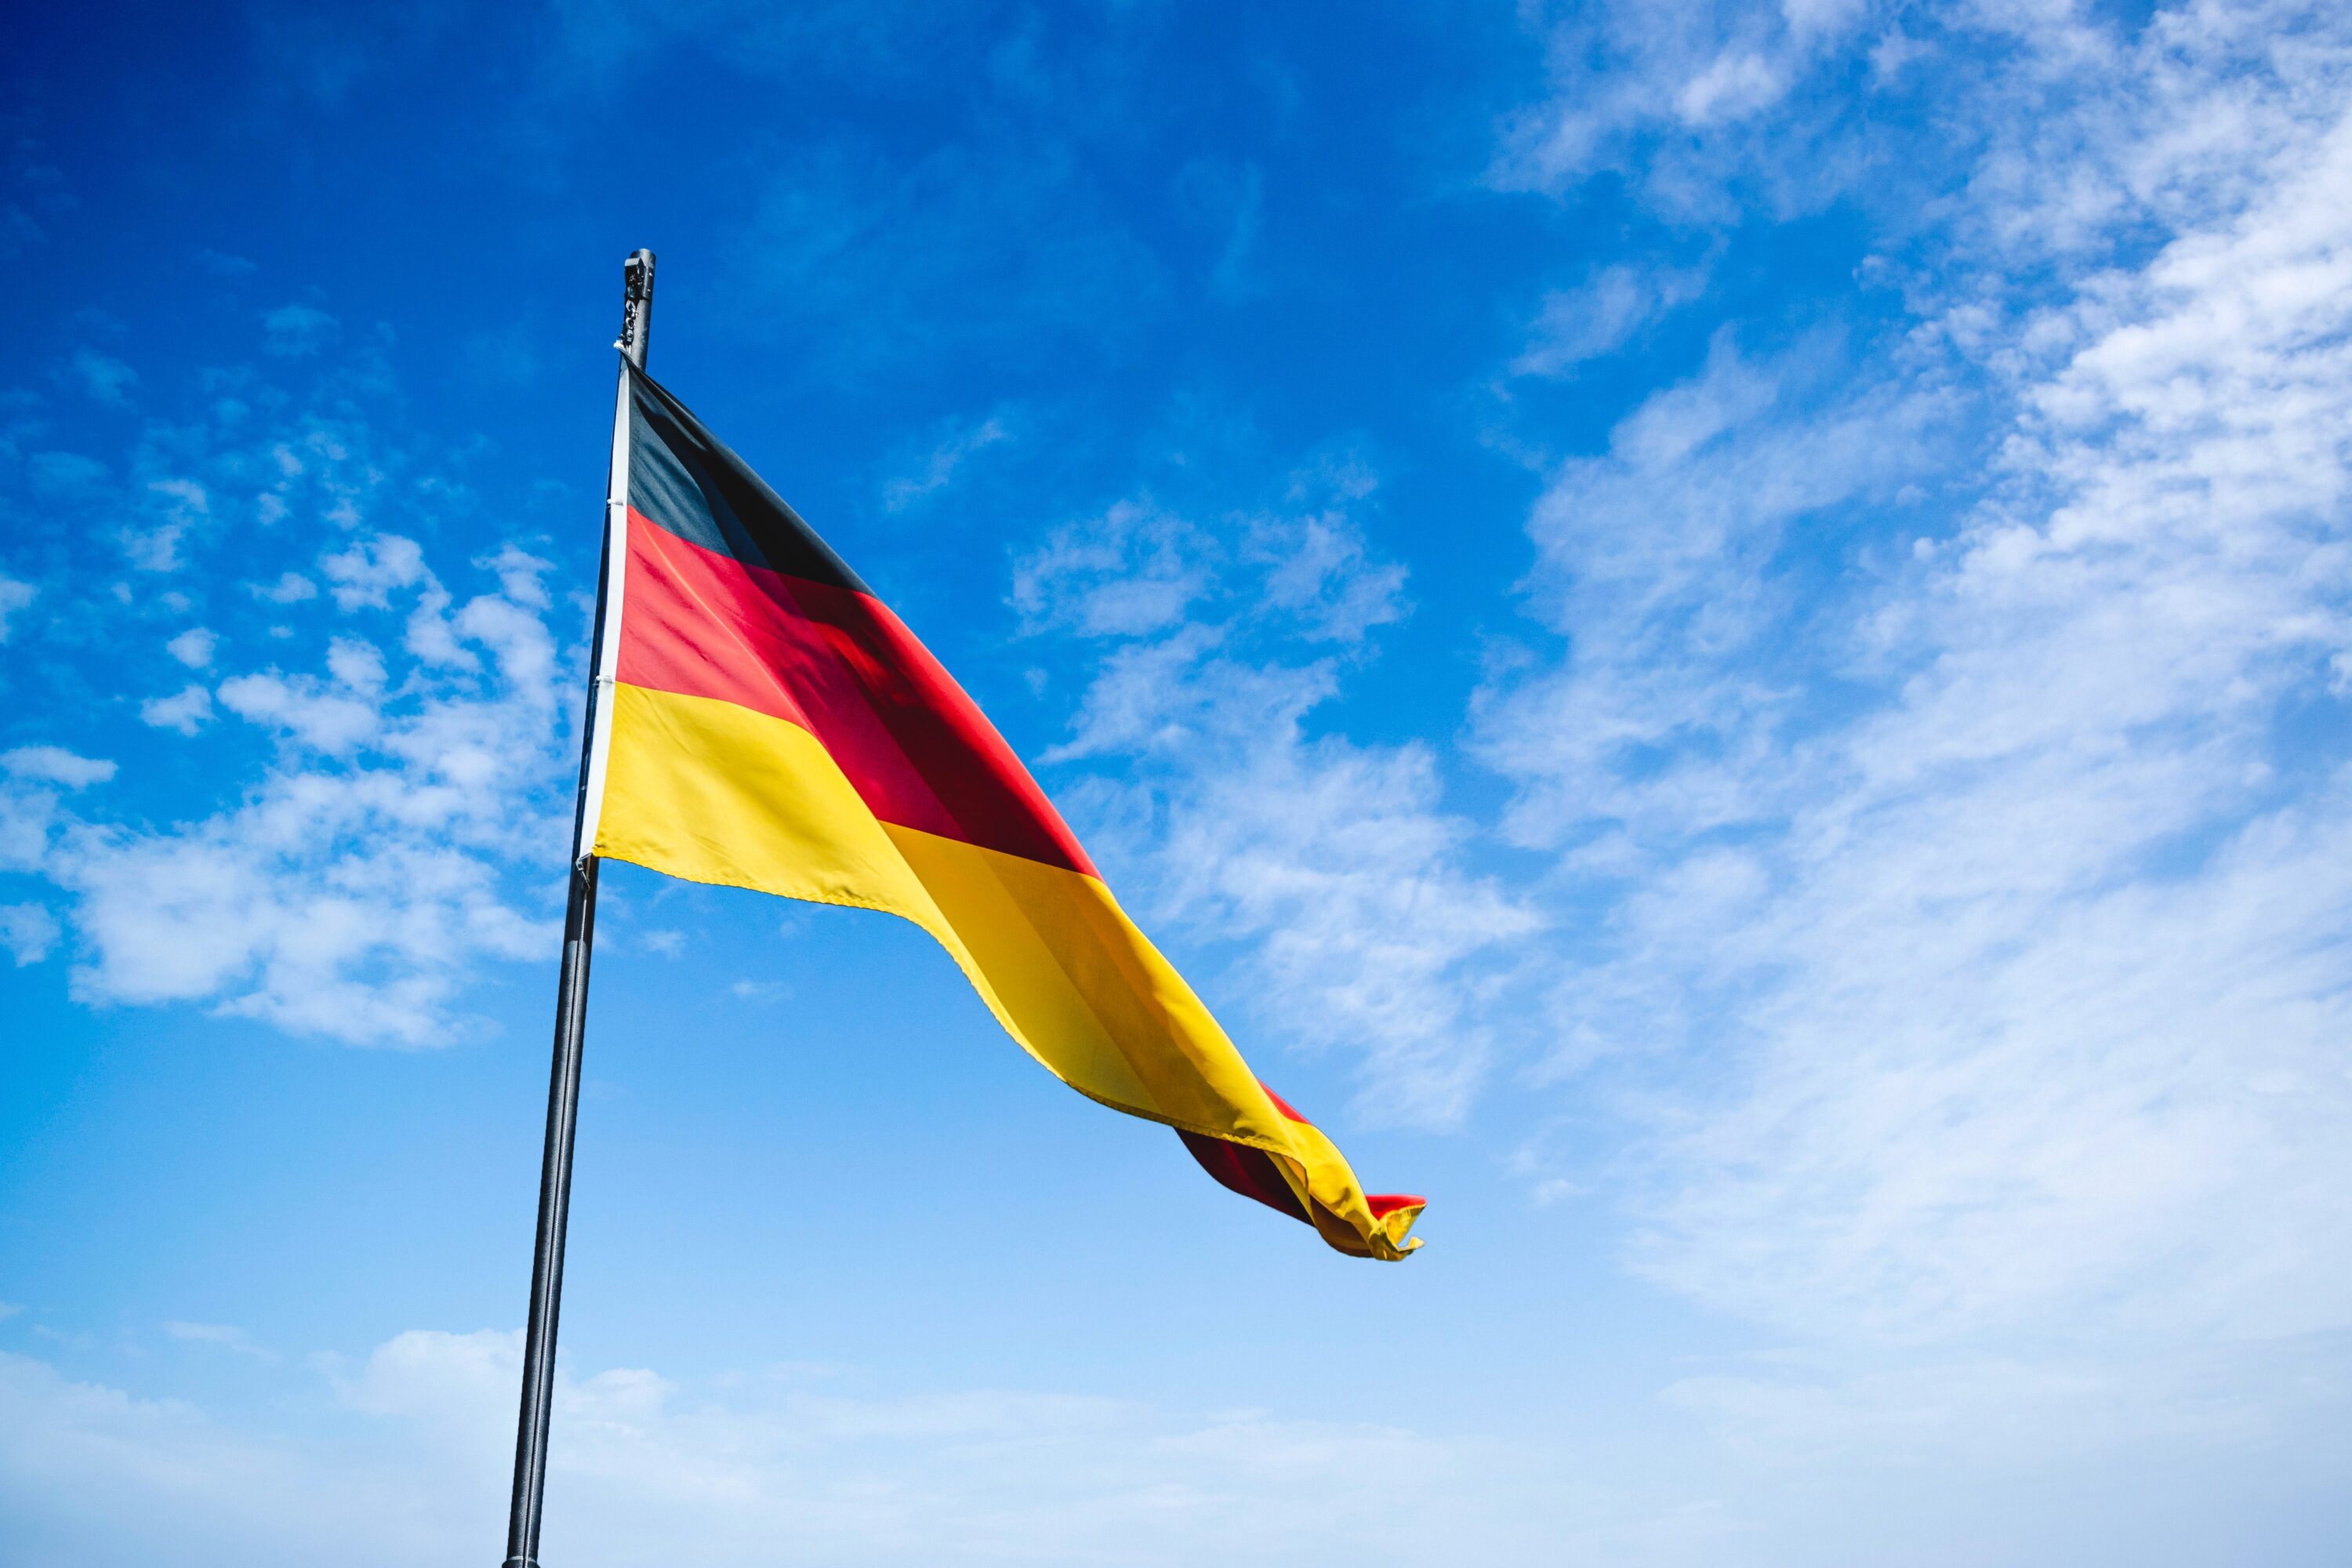 Commerzbank takes the lead in Germany with a crypto custody licence